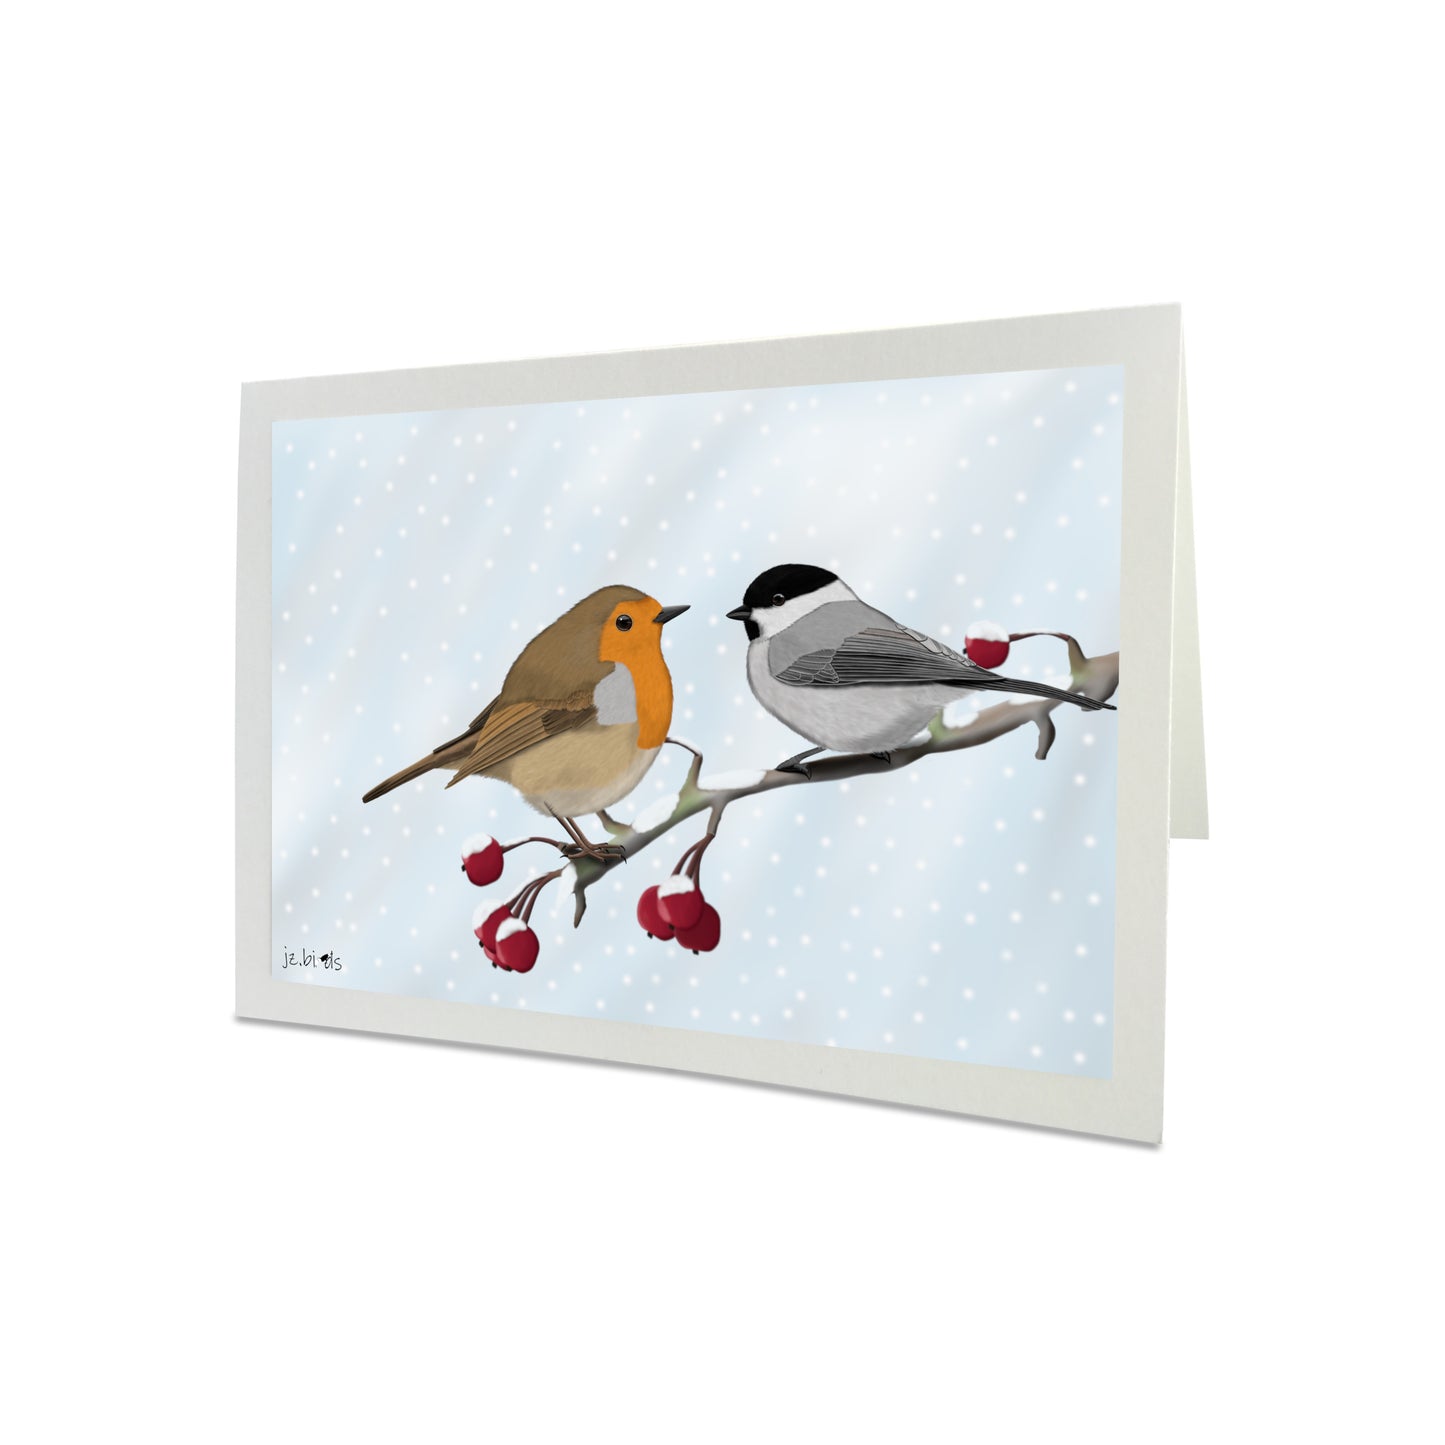 Robin and Willow Titmouse Bird on a Winter Branch Greeting Card